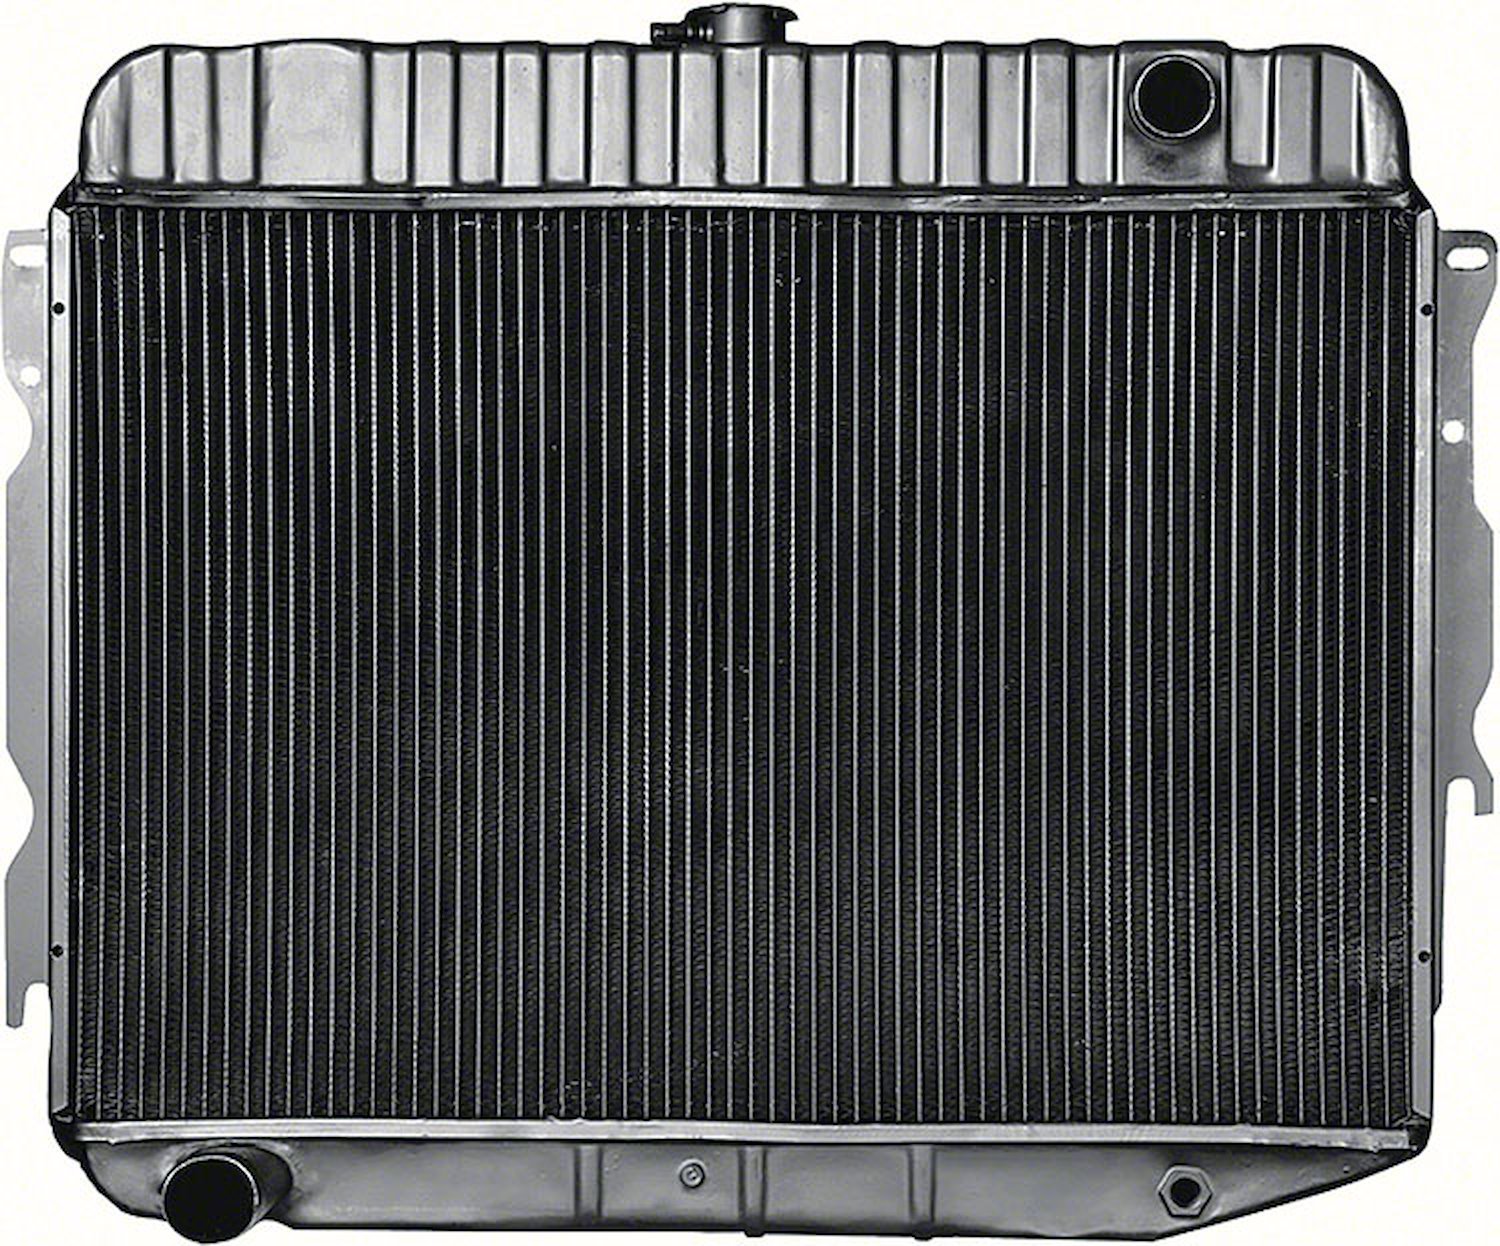 MD2290S Replacement Radiator 1970-72 Mopar B/E-Body Big Block V8 With Standard Trans 3 Row 26" Wide